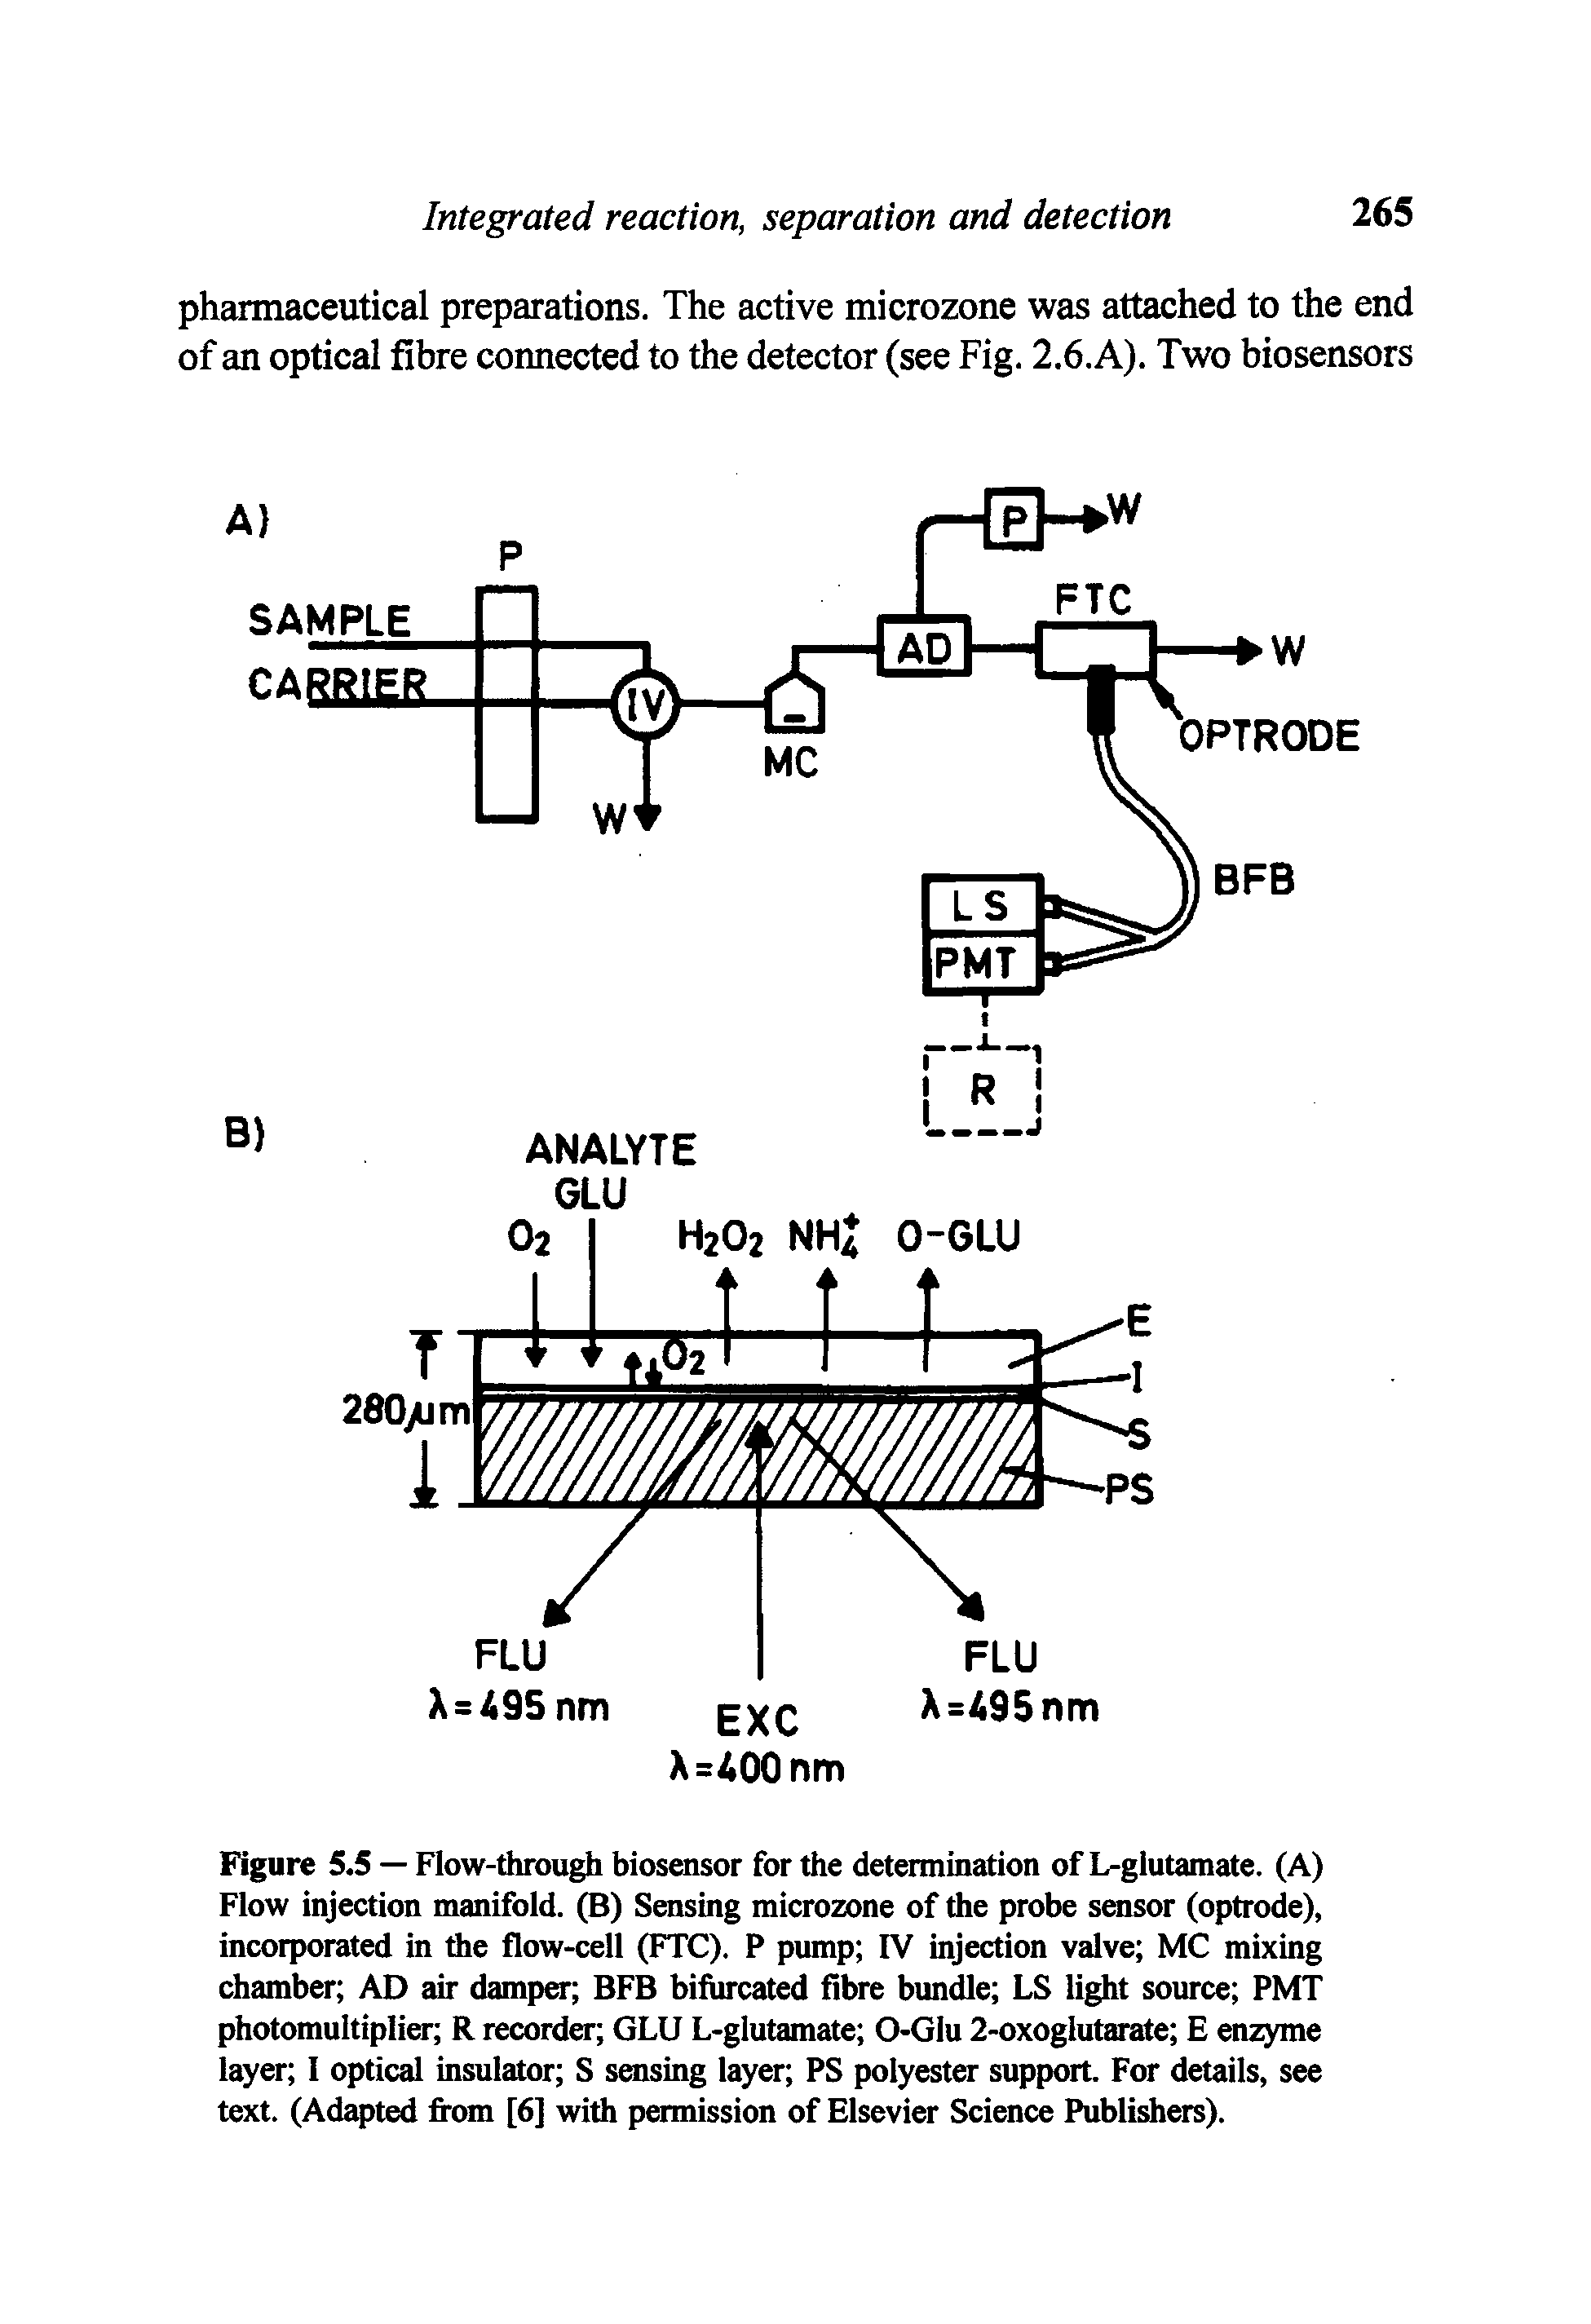 Figure 5.5 — Flow-through biosensor for the determination of L-glutamate. (A) Flow injection manifold. (B) Sensing microzone of the probe sensor (optrode), incorporated in the flow-cell (FTC). P pump IV injection valve MC mixing chamber AD air damper BFB bifurcated fibre bimdle LS light source PMT photomultiplier R recorder GLU L-glutamate 0-Glu 2-oxoglutarate E enzyme layer I optical insulator S sensing layer PS polyester support. For details, see text. (Adapted from [6] with permission of Elsevier Science Publishers).